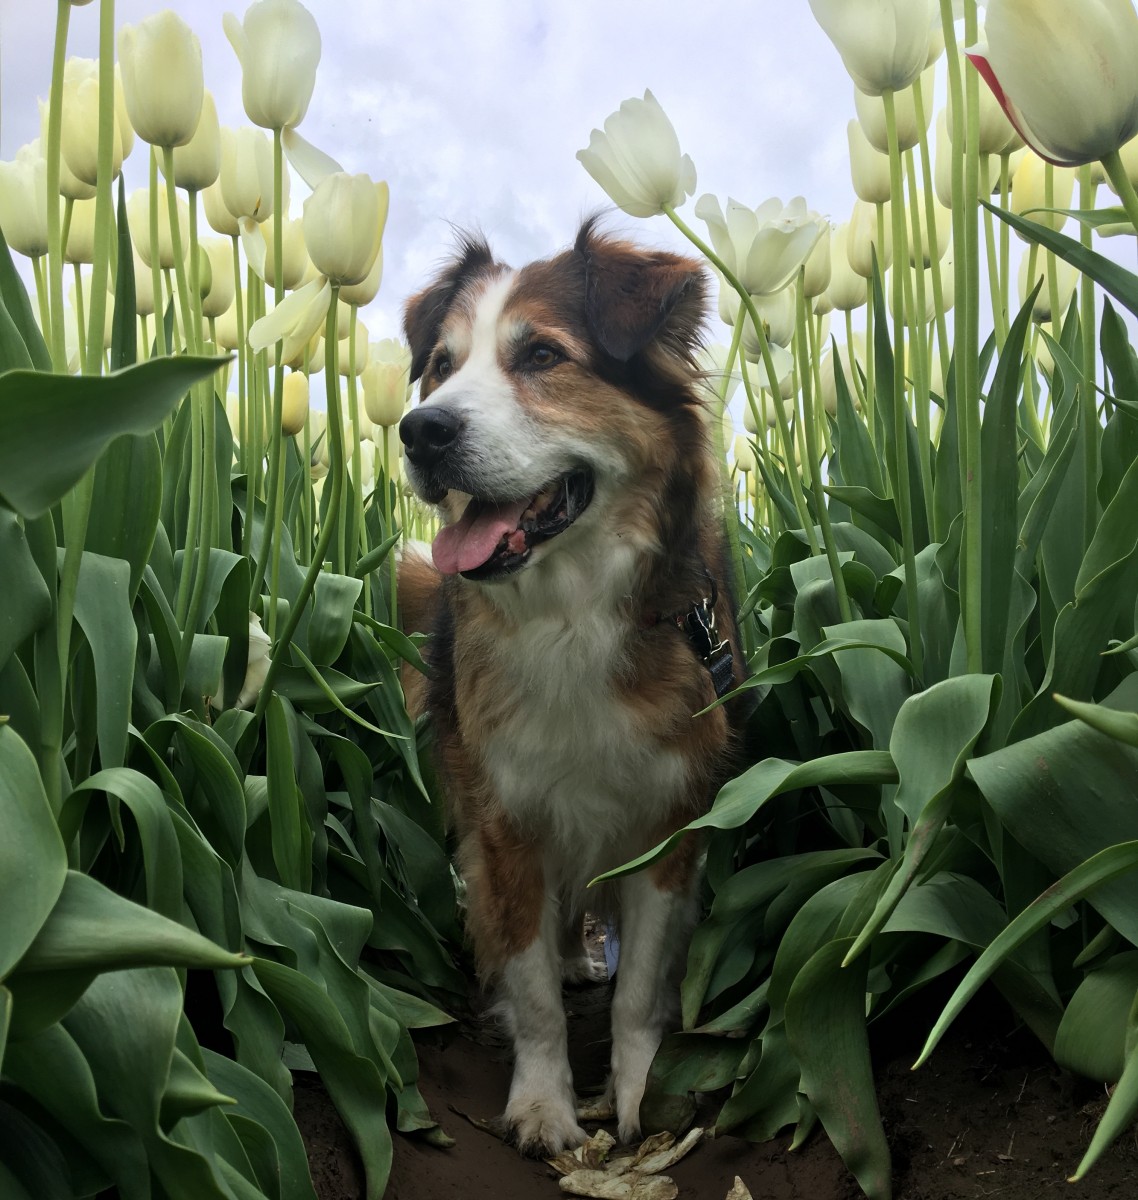 2019 OHS Photo Contest Winners